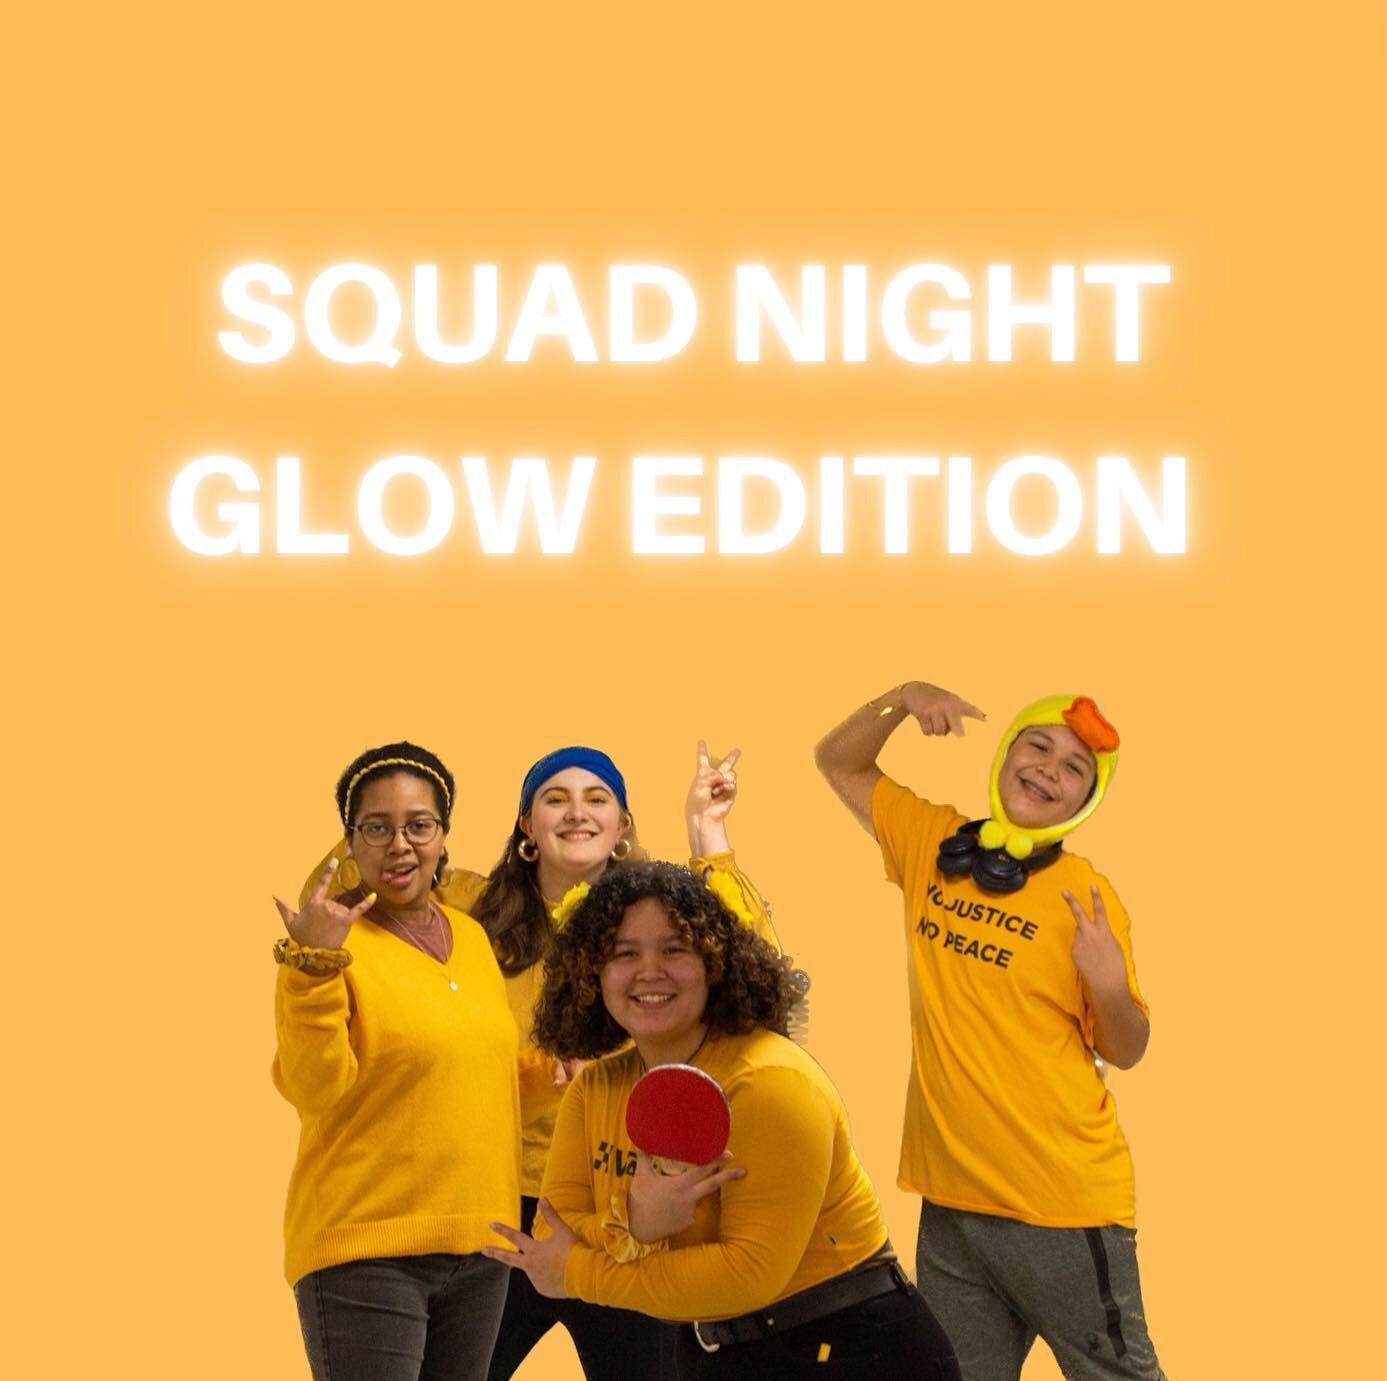 Tomorrow is SQUAD NIGHT (but make it GLOW). 

Invite a friend, rep your team colours (and some white to really glow) and get ready to battle for more points! 

Mids: 6pm, Highs: 7:30pm. 

May the odds be ever in your favor 👀💪🏽